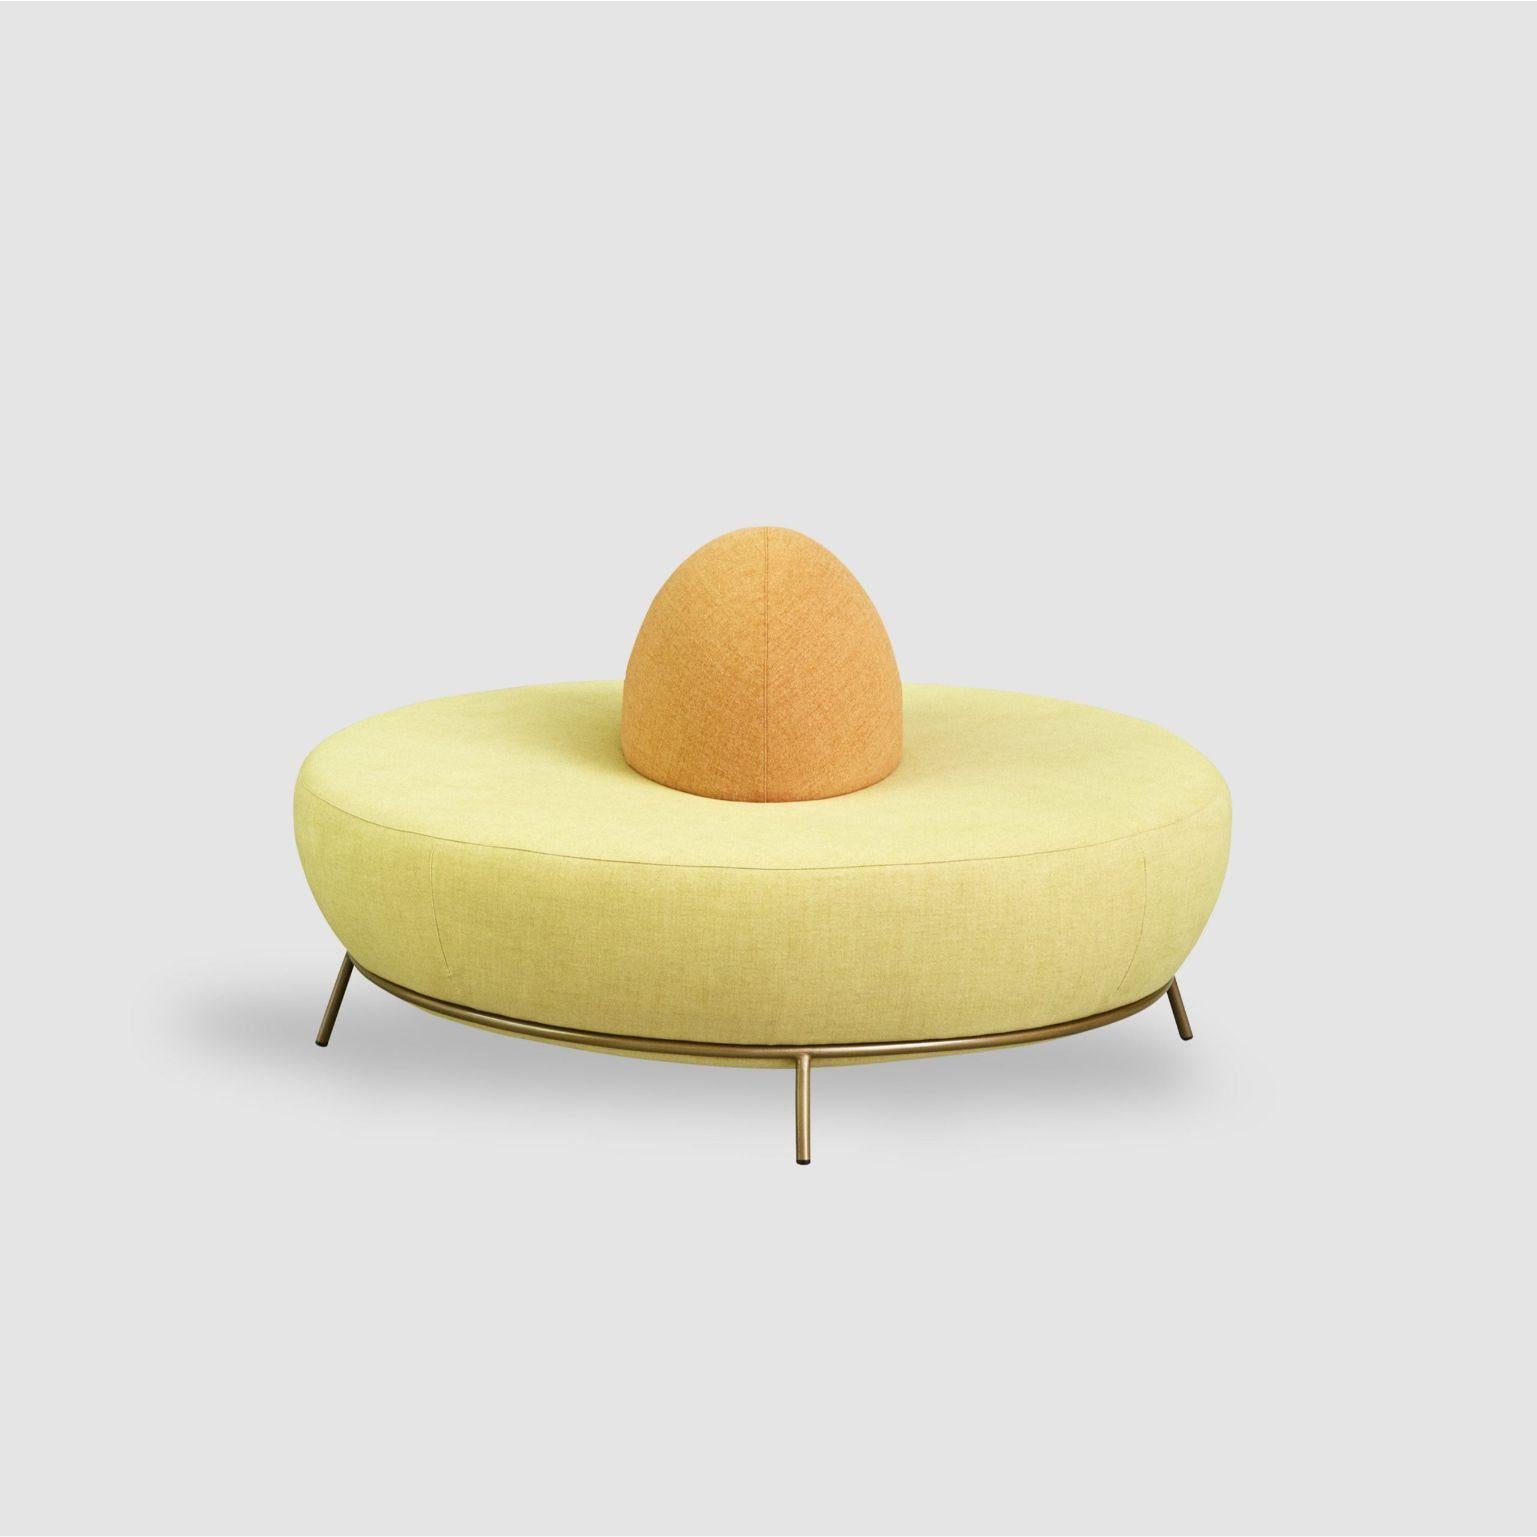 Nest round sofa with backrest by Pepe Albargues
Dimensions: W140, D140, H80, Seat42
Materials: Iron structure and MDF board
Foam CMHR (high resilience and flame retardant) for all our cushion filling systems
Painted or chromed legs
Stainless